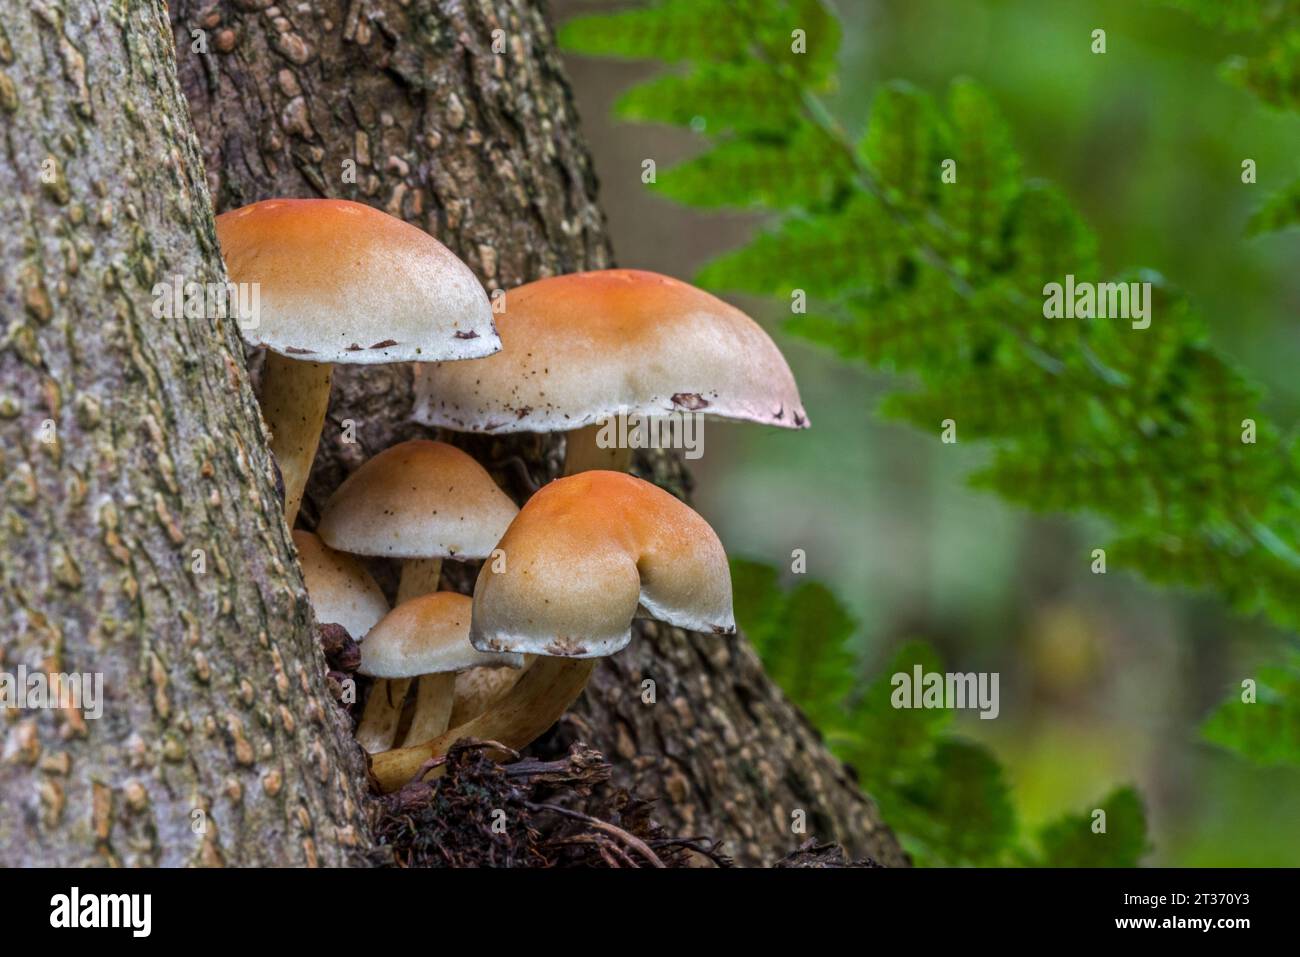 Sulphur tuft fungi / clustered woodlover (Hypholoma fasciculare / Psilocybe fascicularis) mushrooms growing on tree trunk in autumn forest Stock Photo